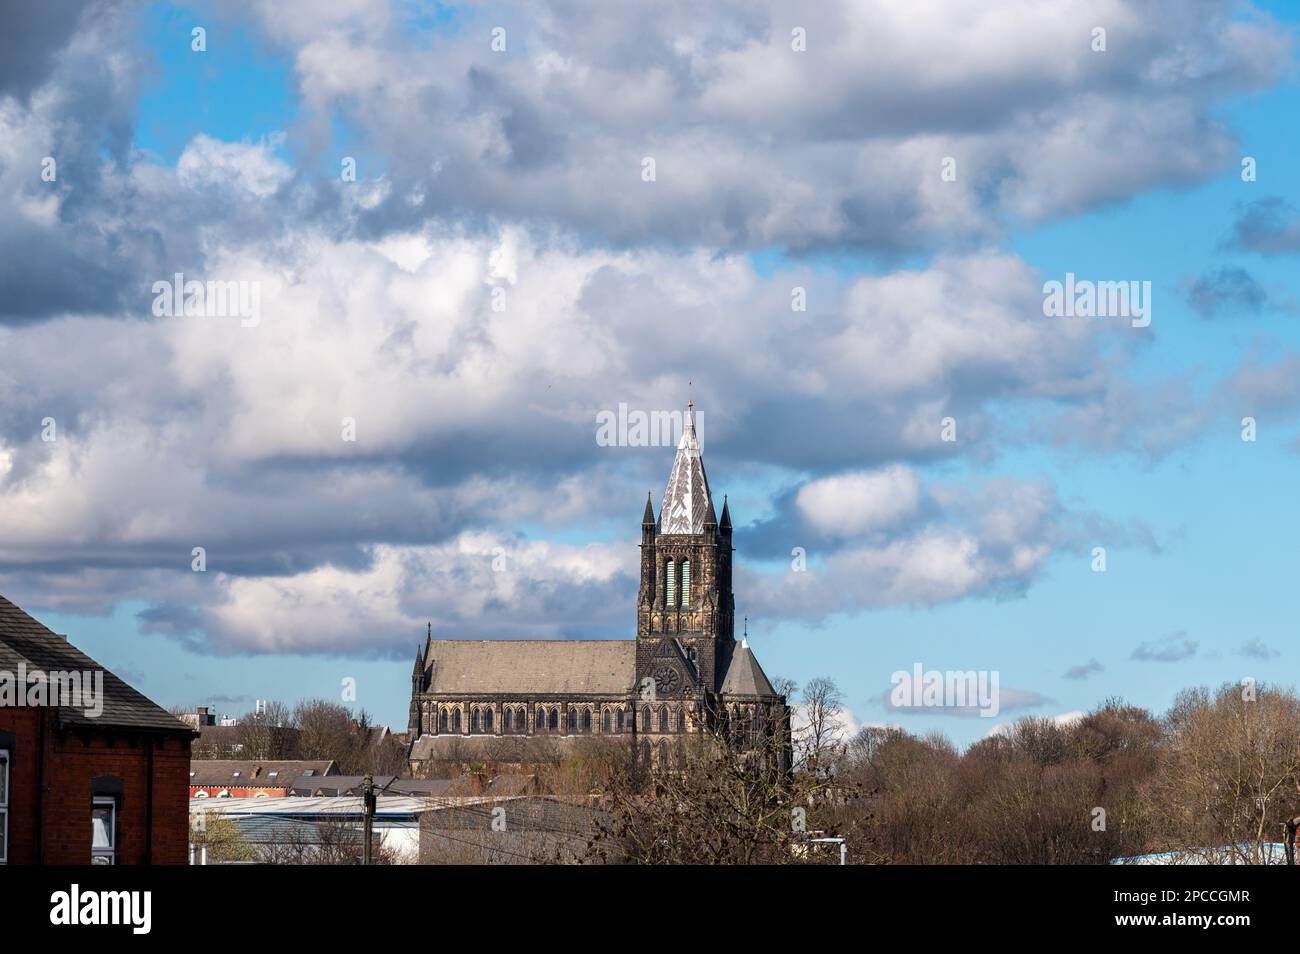 St Bartholomew's Church, Armley is a parish church in the Church of England in Armley, Leeds, West Yorkshire. Stock Photo